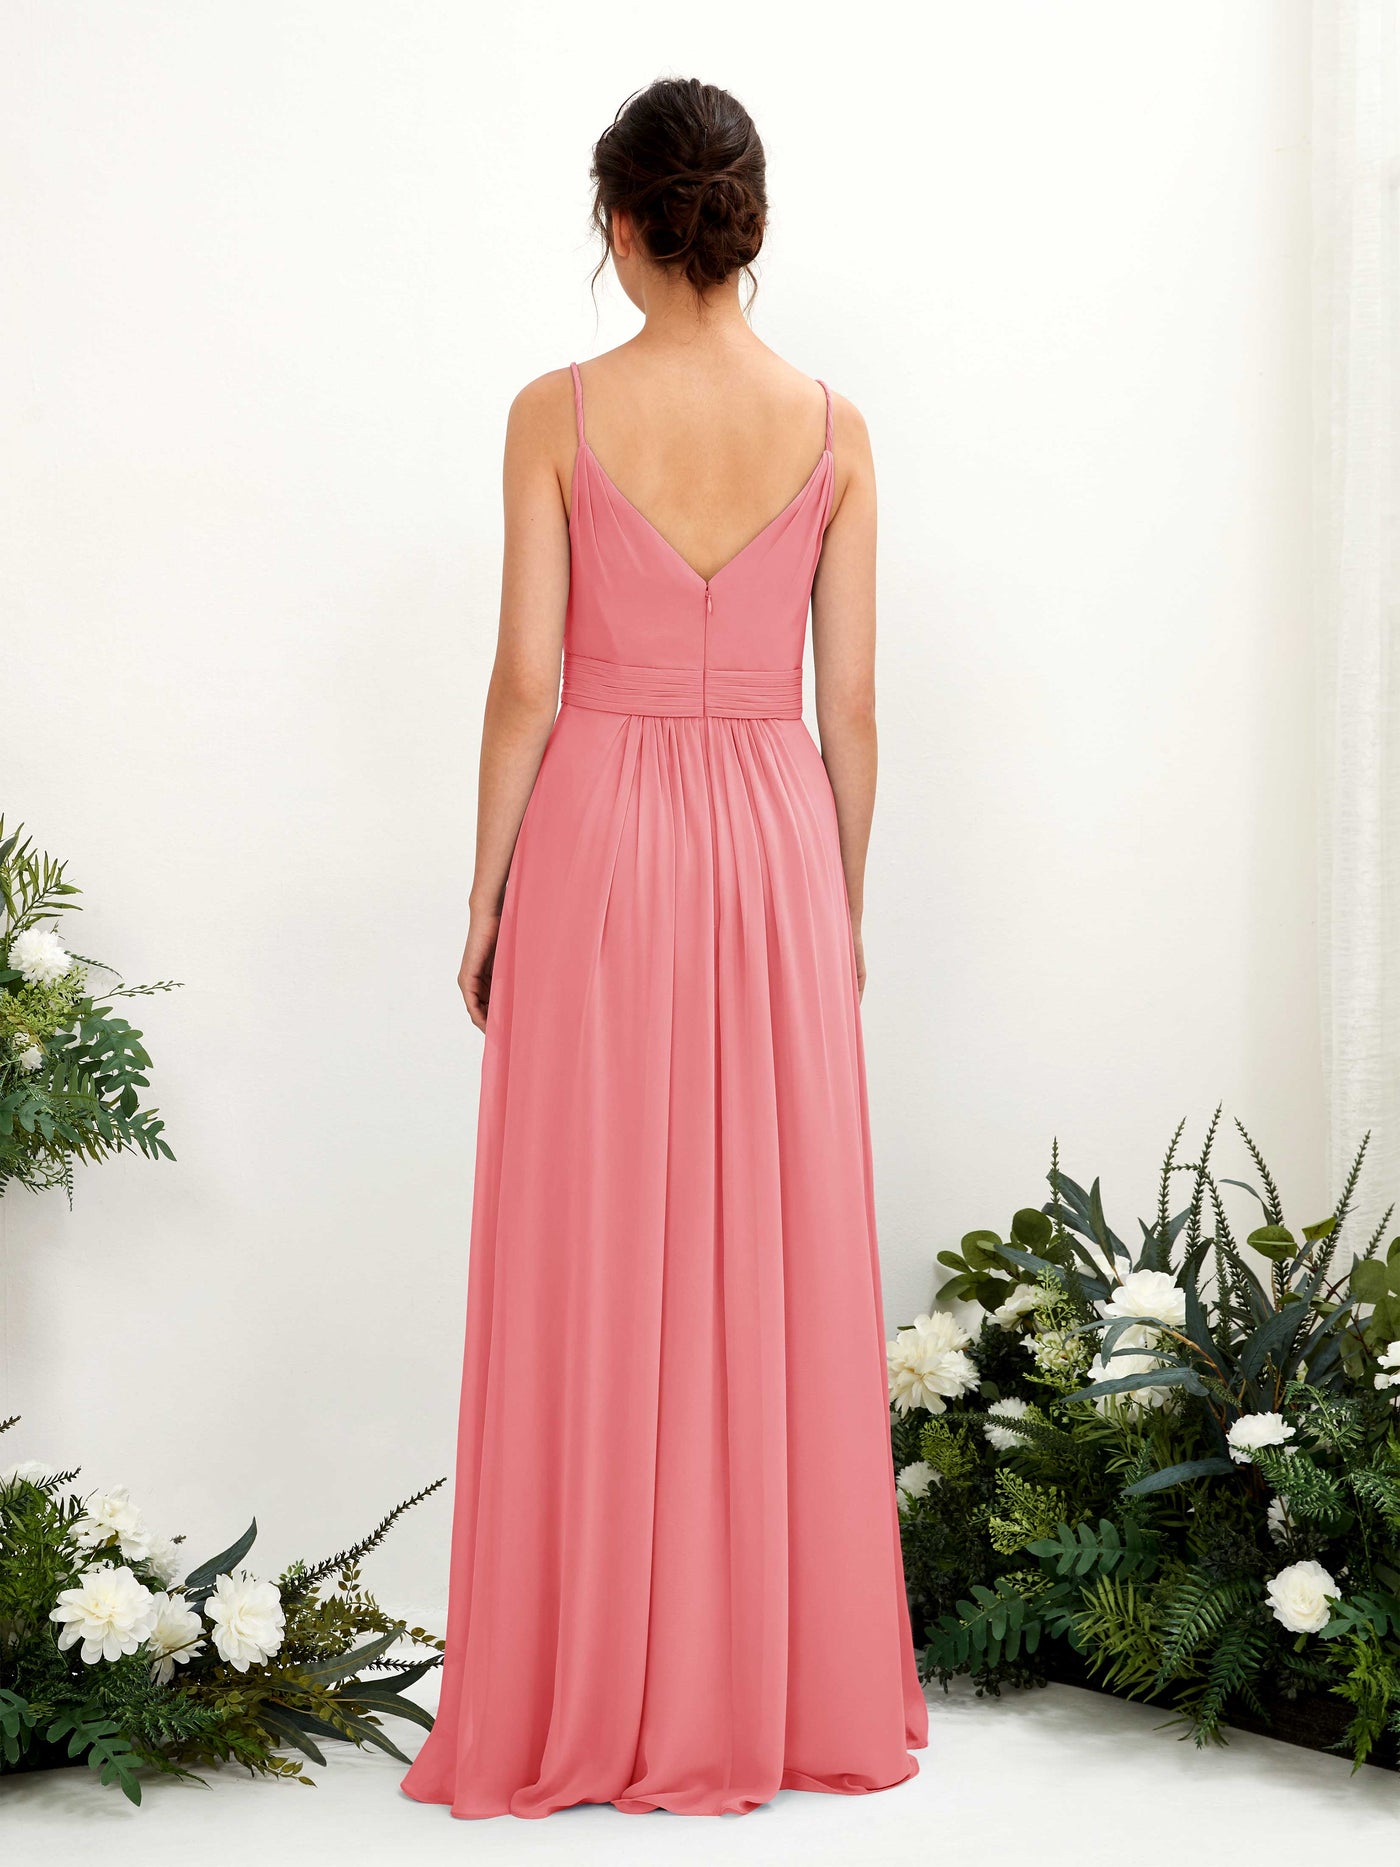 Coral Pink Bridesmaid Dresses Bridesmaid Dress A-line Chiffon Spaghetti-straps Full Length Sleeveless Wedding Party Dress (81223930)#color_coral-pink